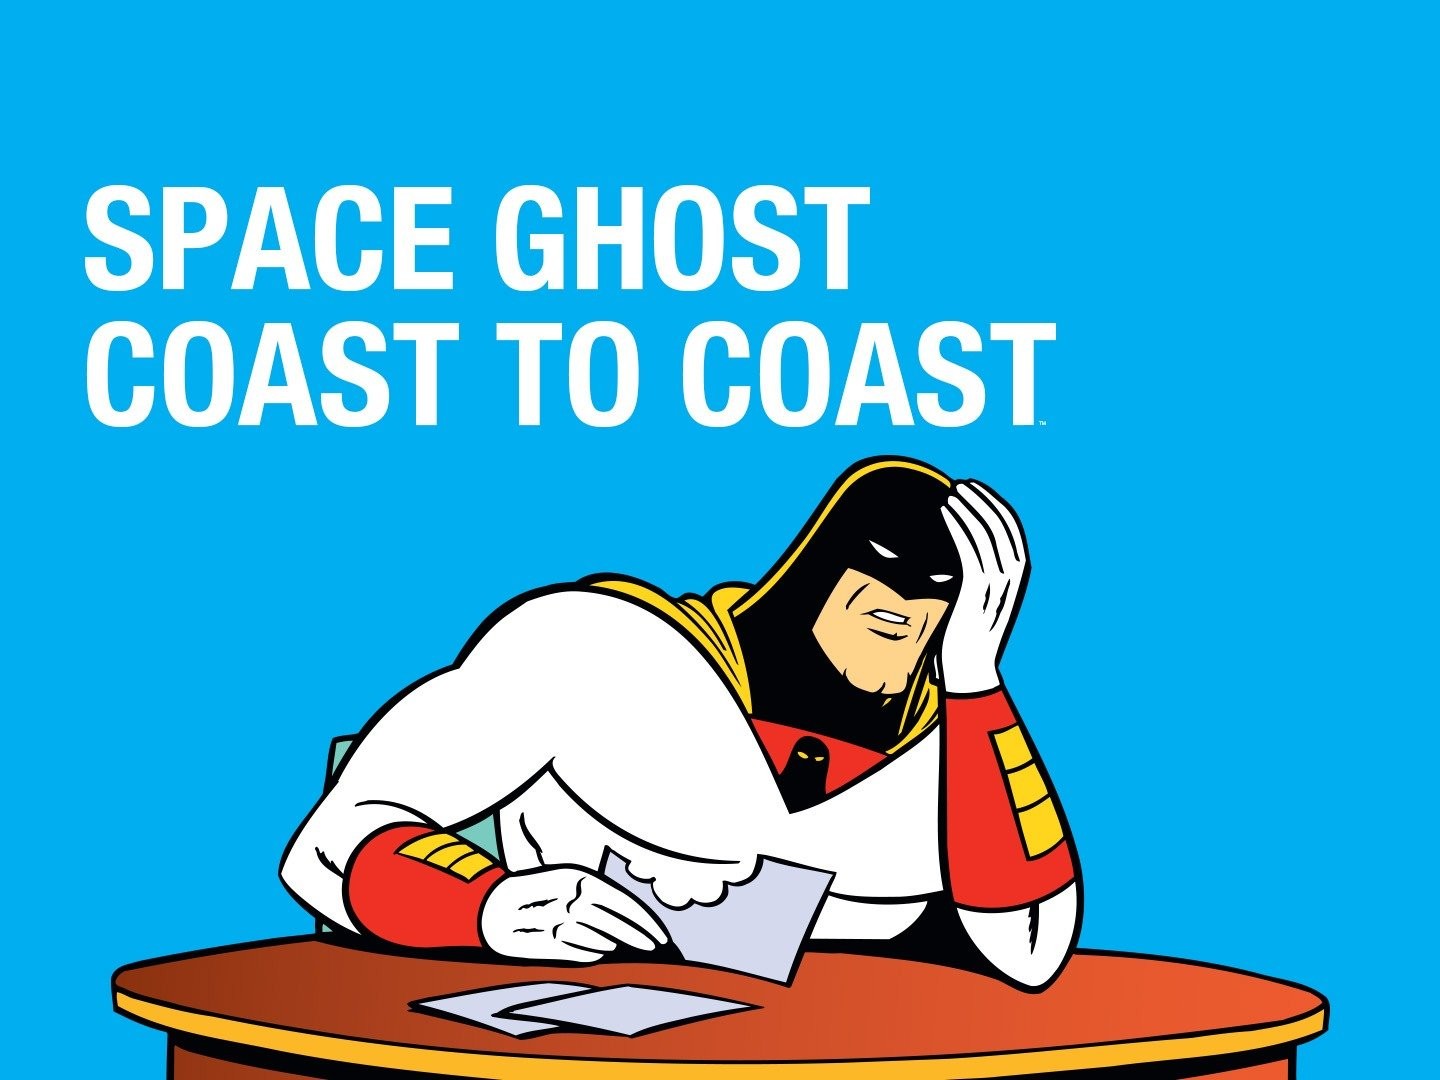 Space Ghost Coast to Coast - Not Going to Save Wall Poster, 22.375